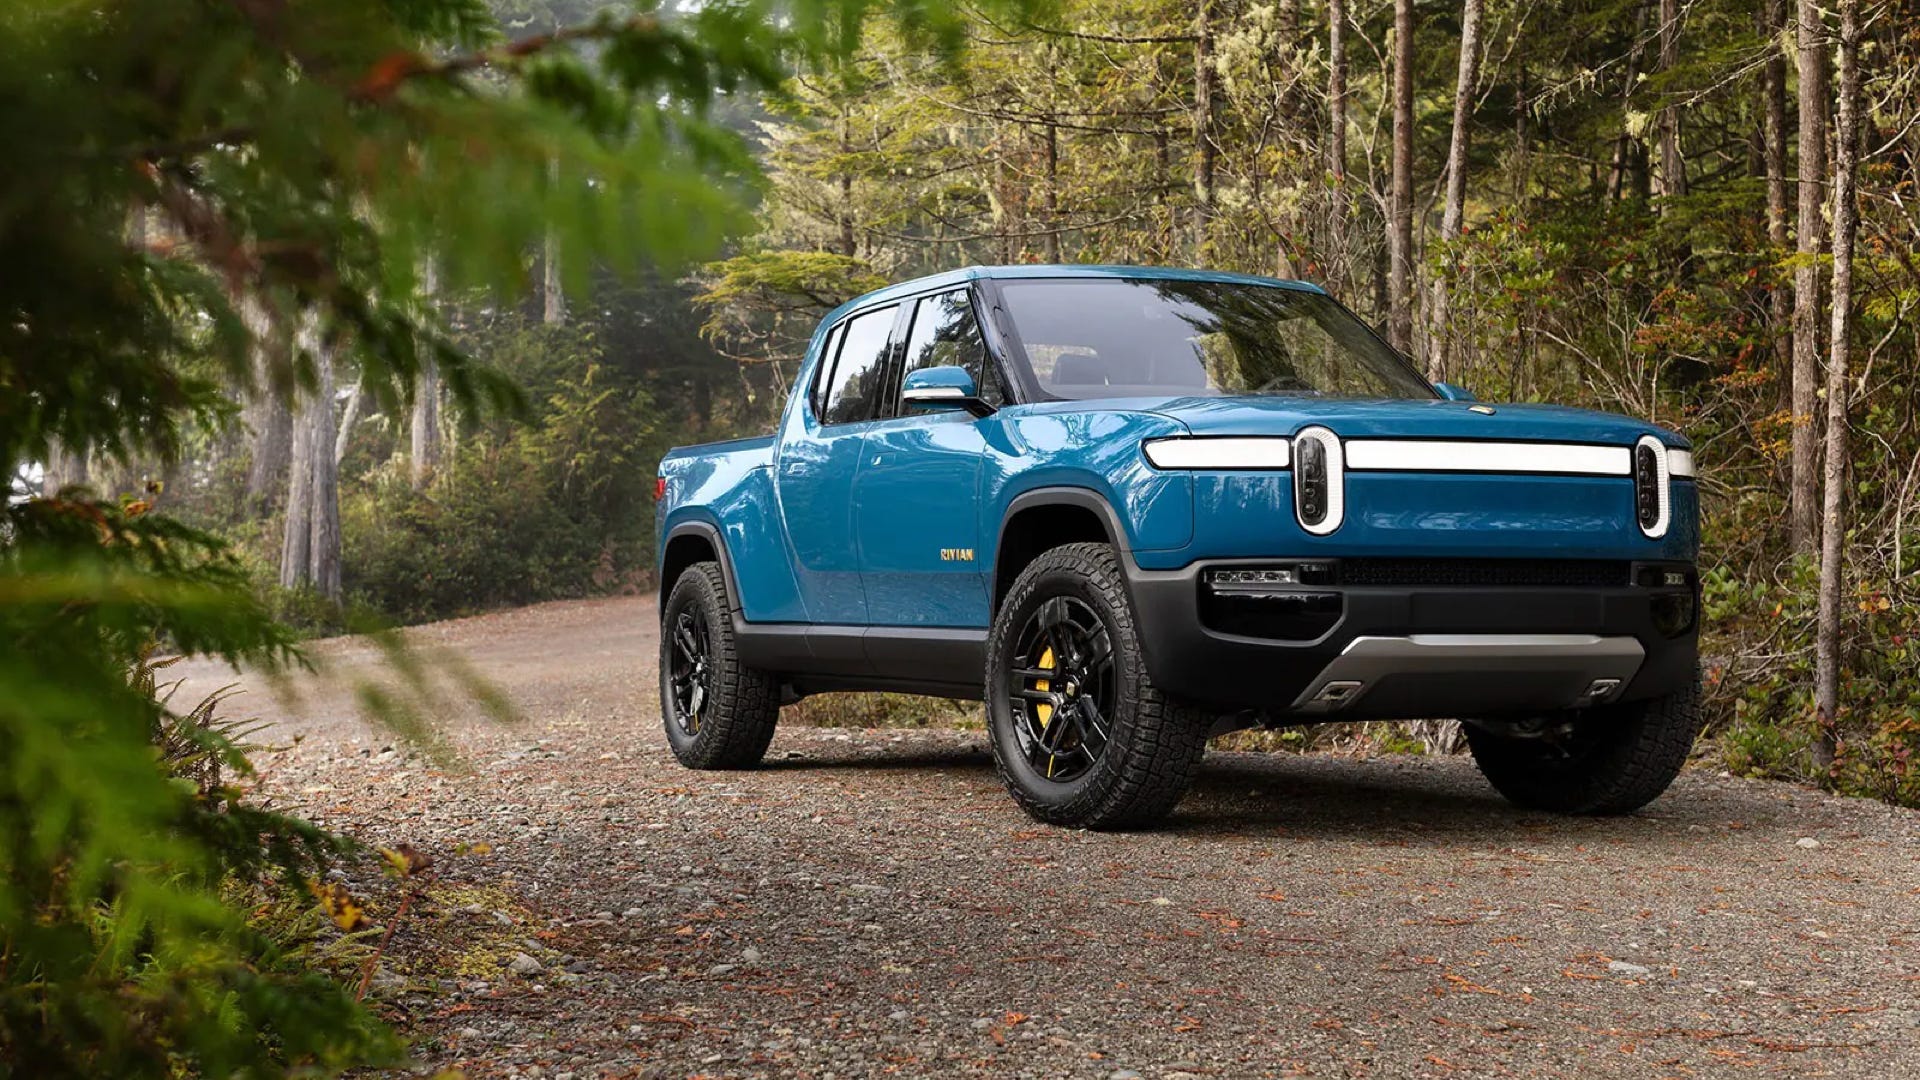 Rivian R1T Electric Truck Recalled Over Dangerous Child Safety Issue